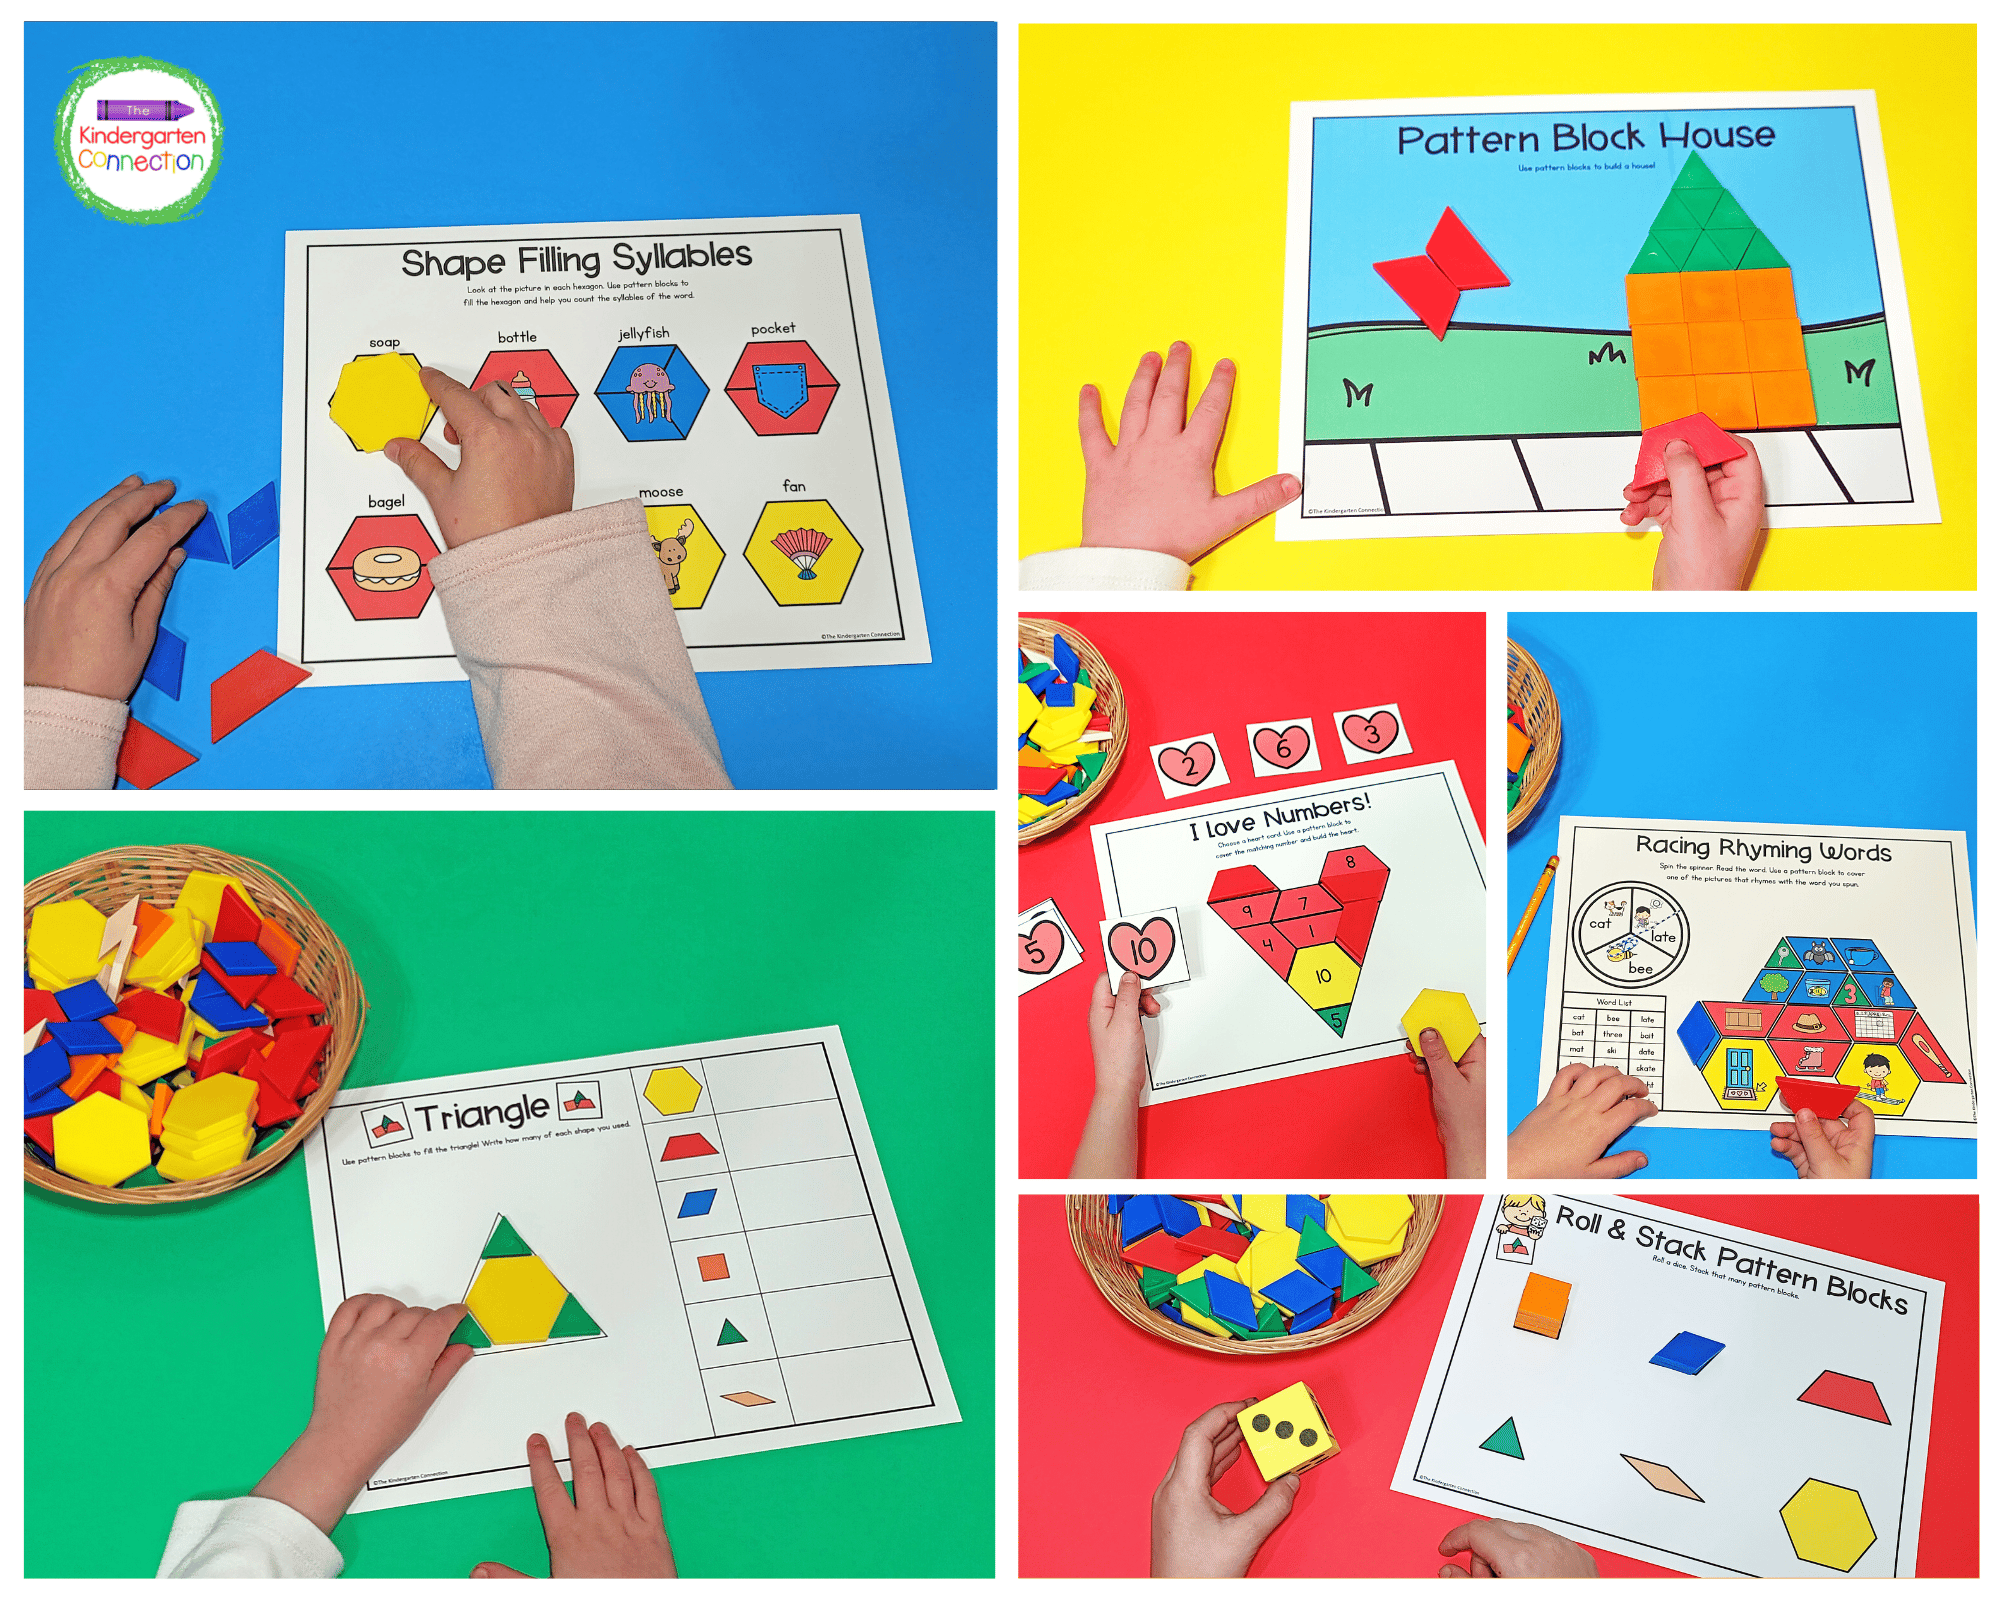 This pack is filled with printable resources that are designed to pair perfectly with pattern blocks!